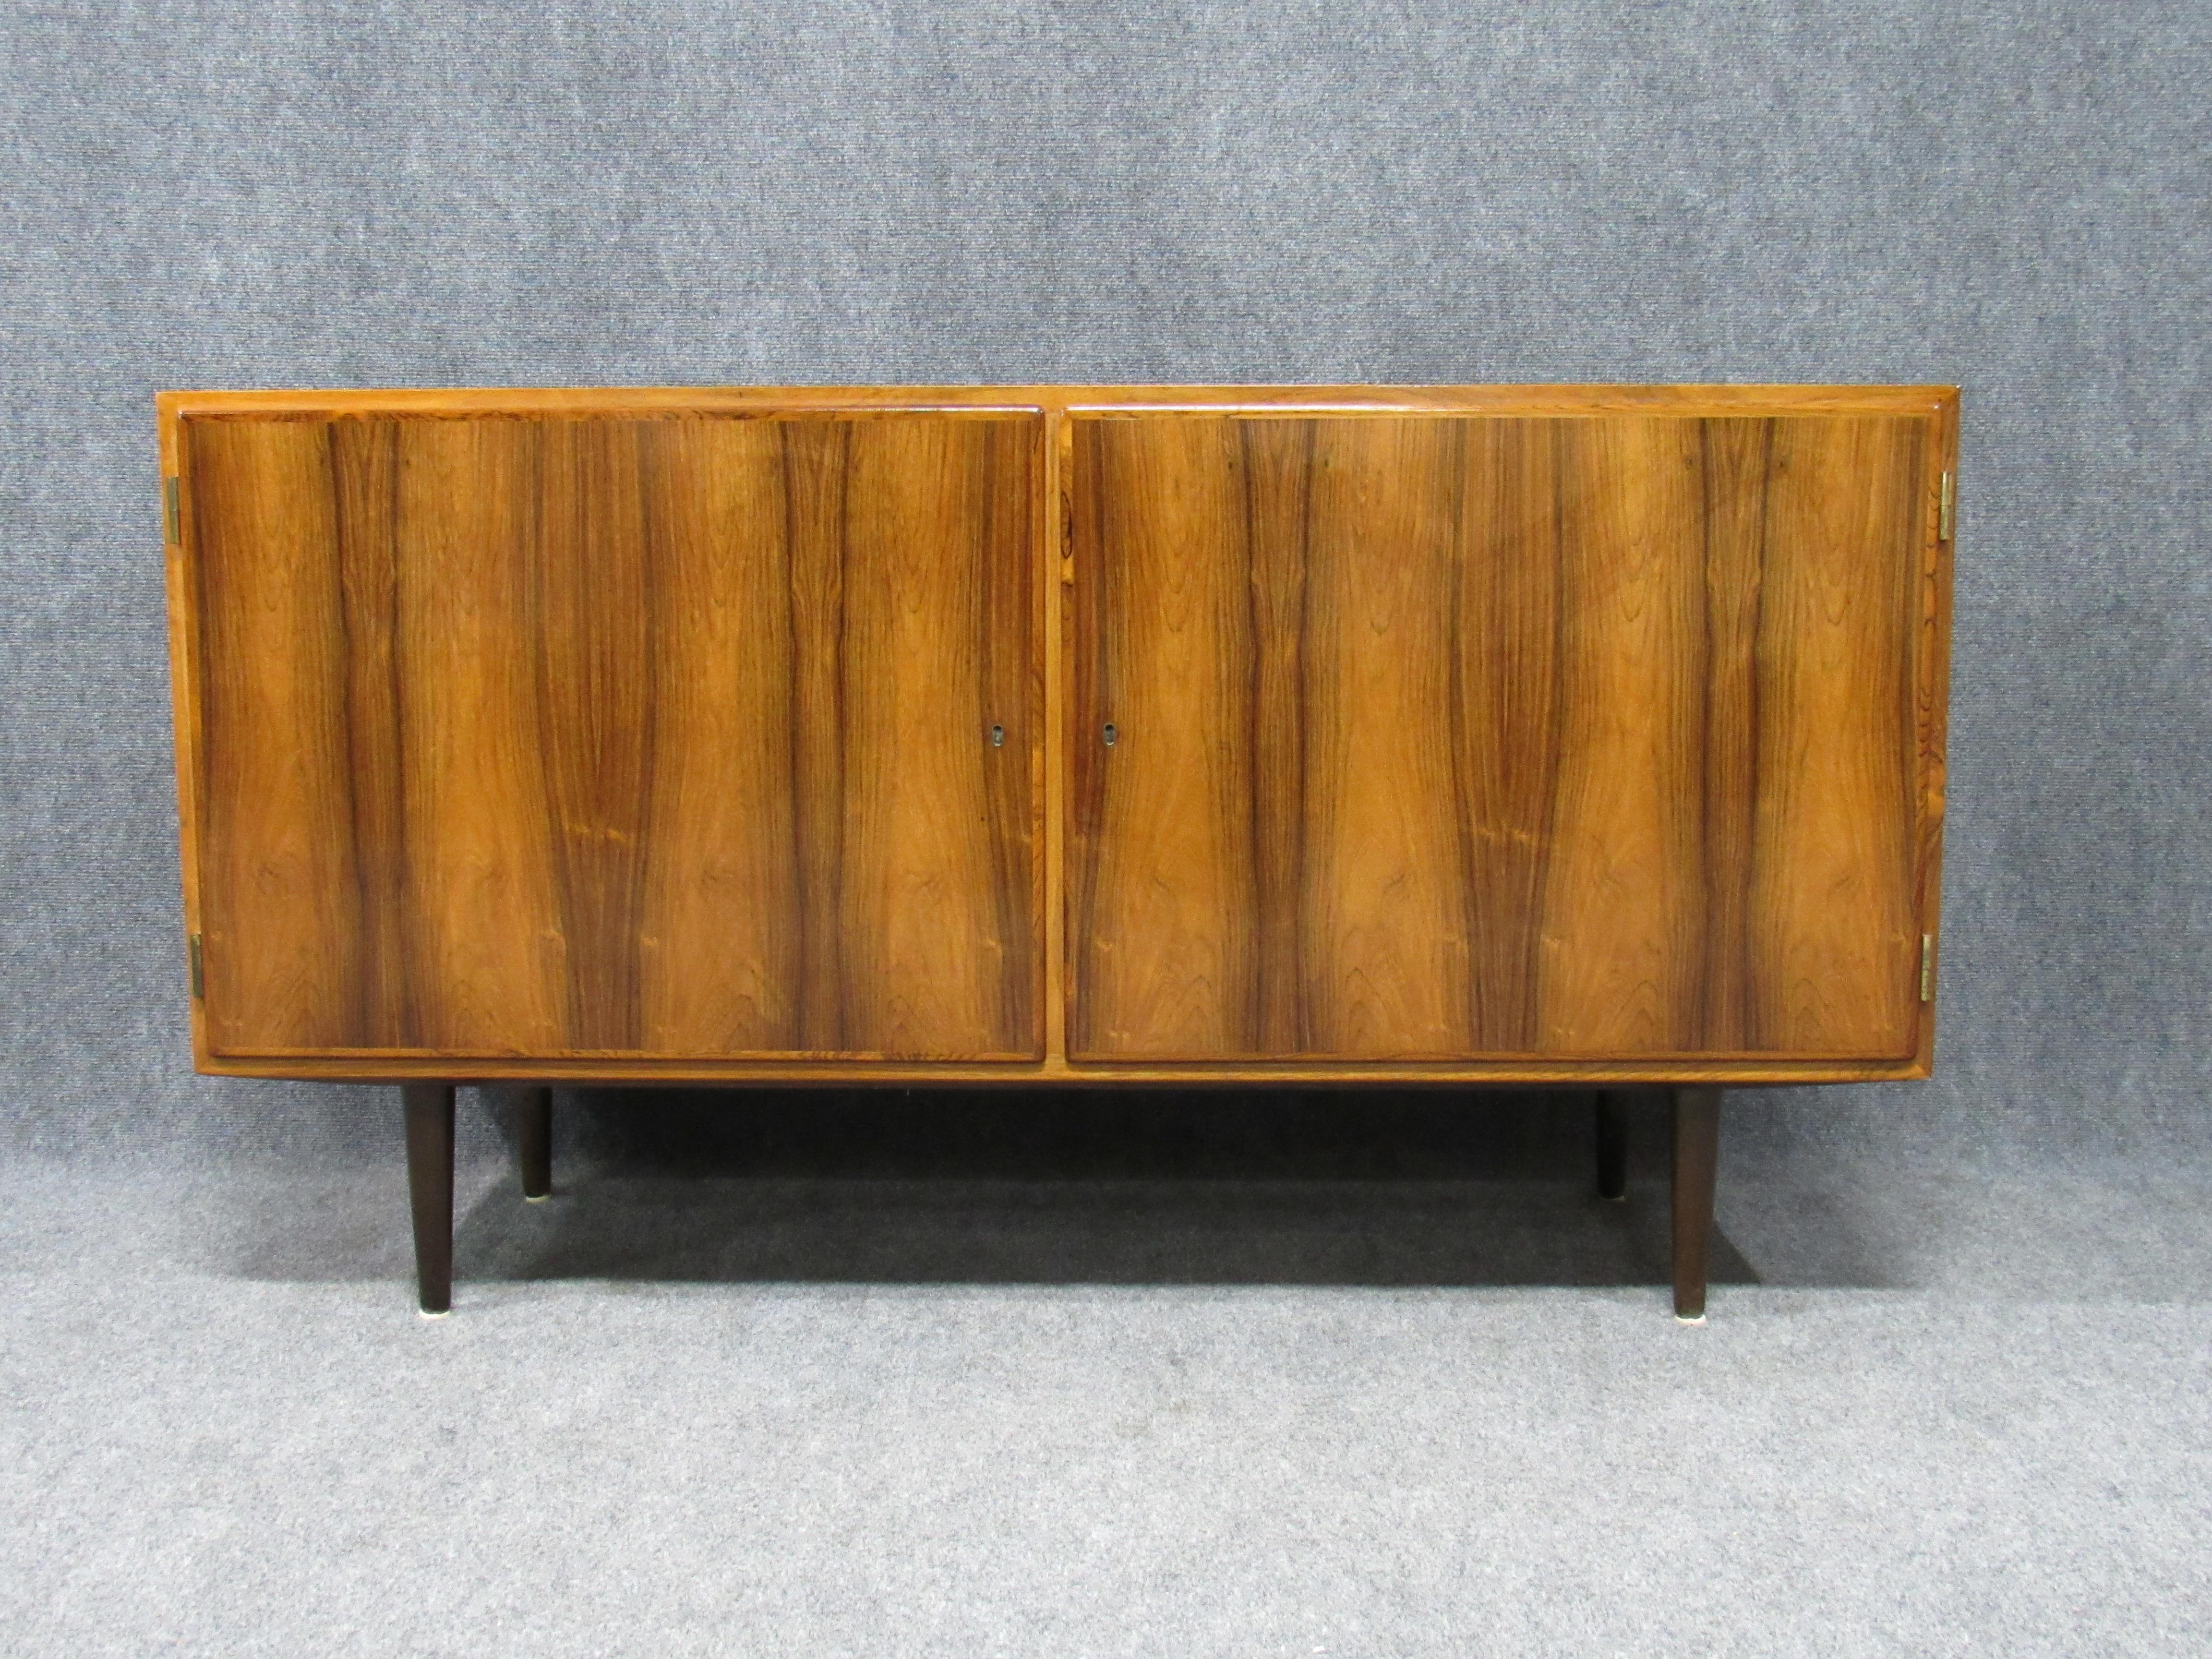 Mid-Century Modern 1960s Midcentury Danish Modern Rosewood Credenza Sideboard by Poul Hundevad